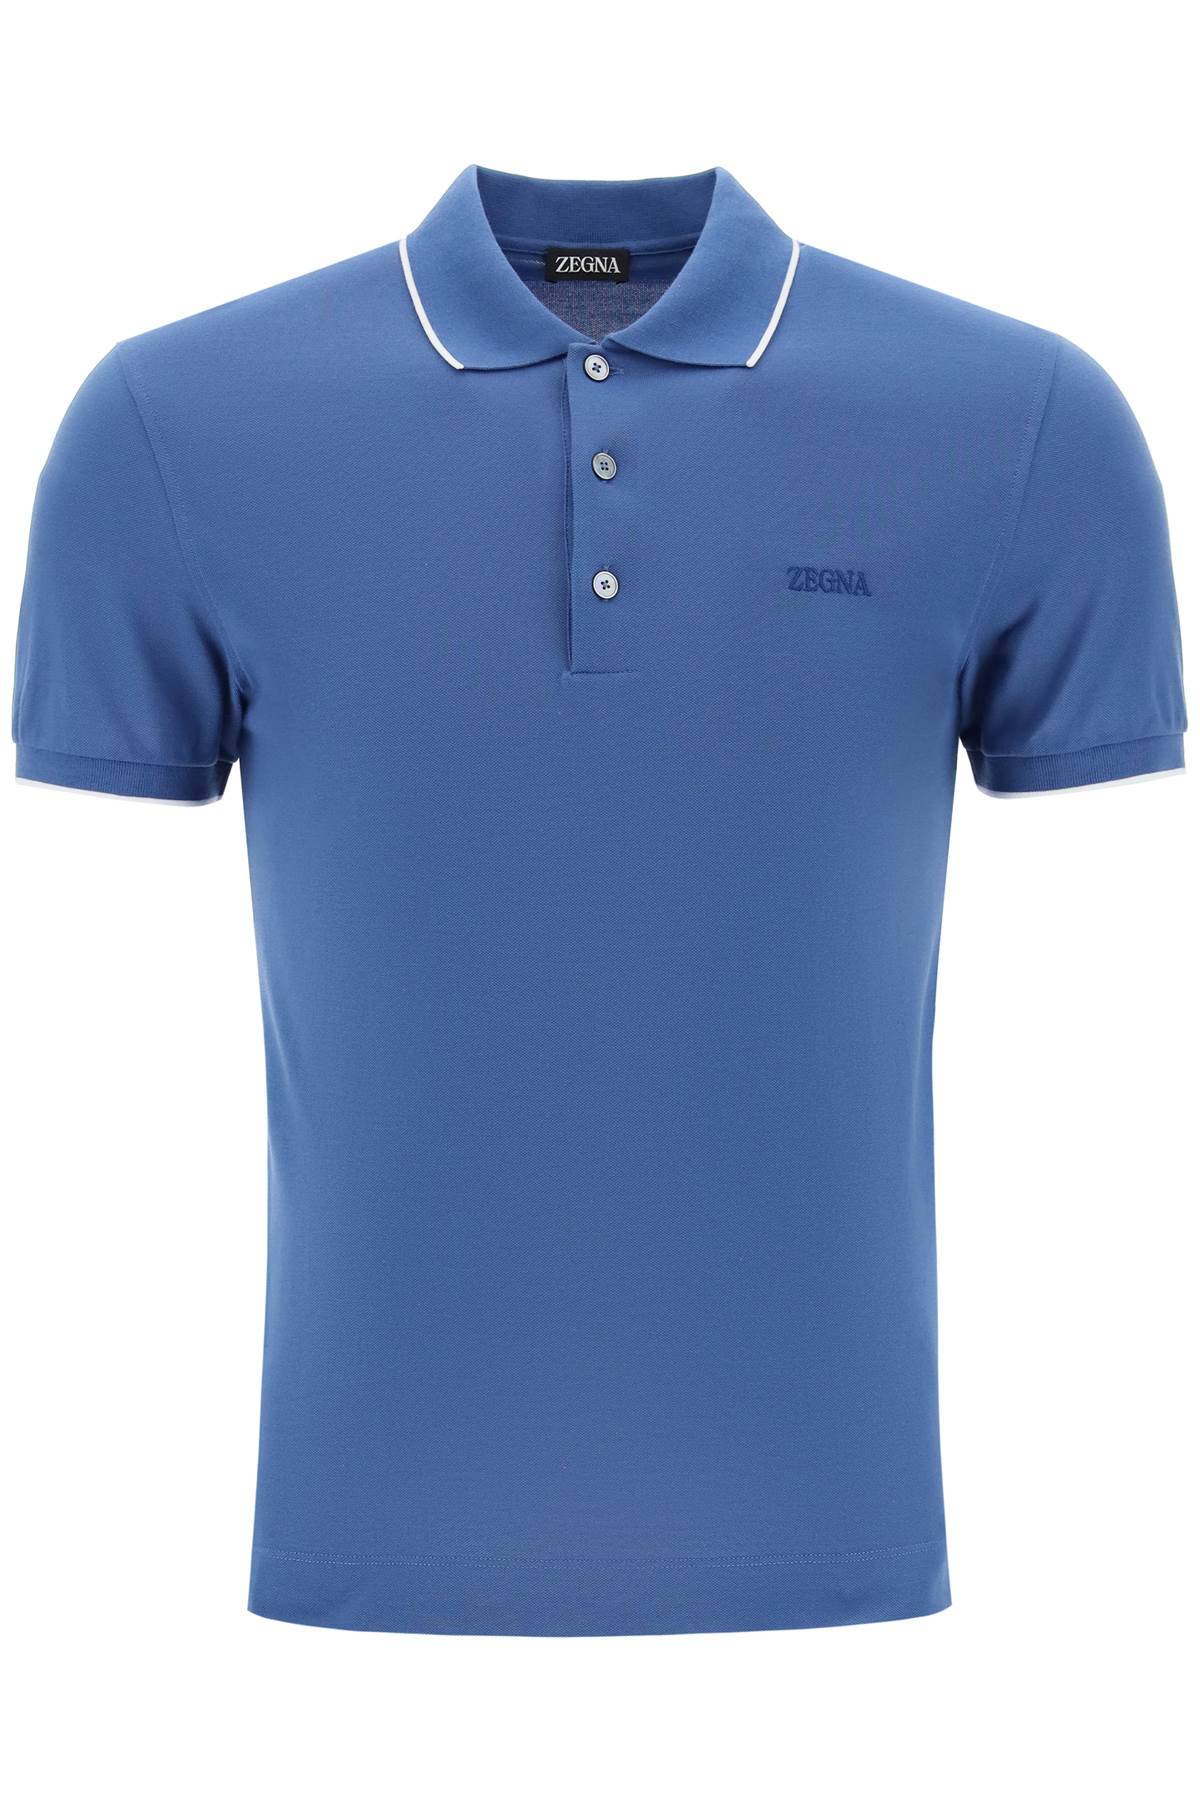 zegna ZEGNA slim fit polo shirt in stretch cotton